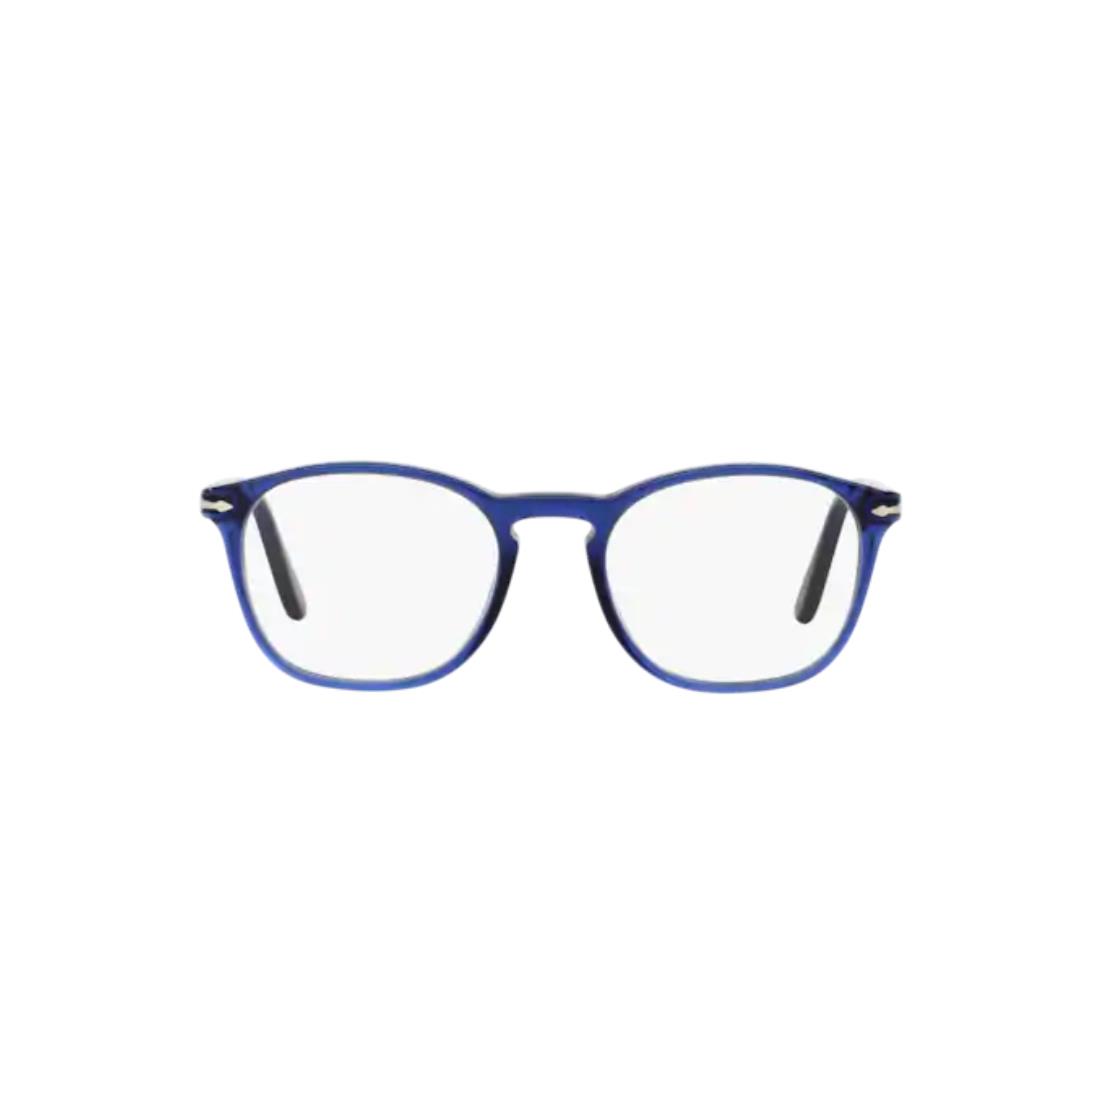 Persol sunglasses  - Blue Frame, Clear Lens